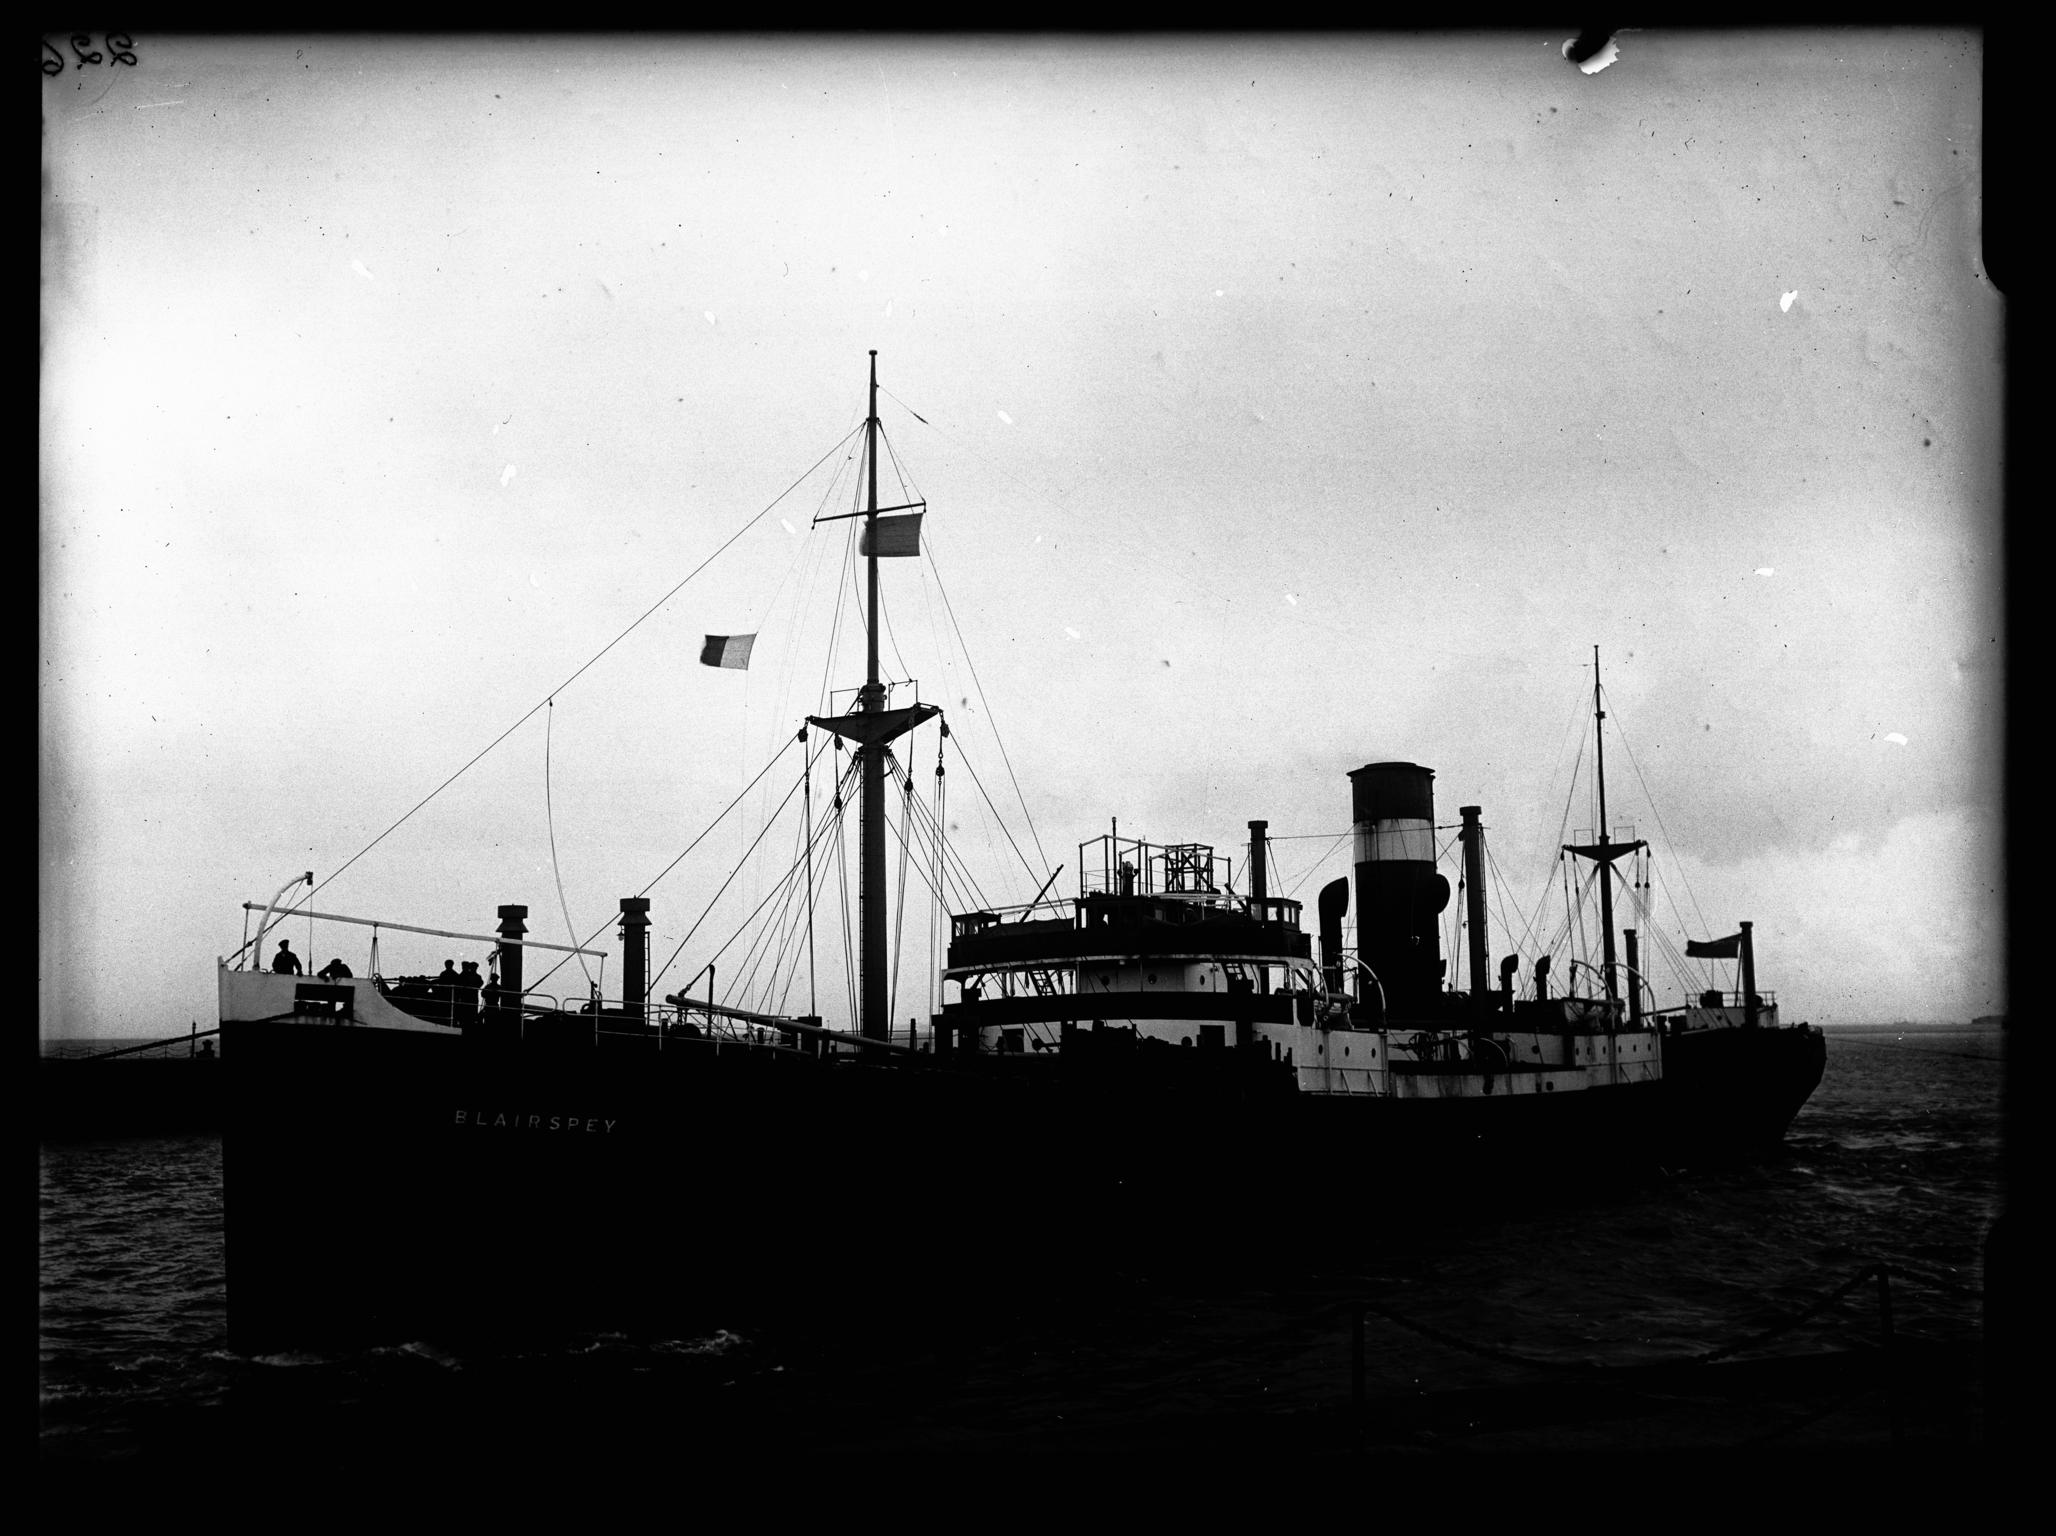 S.S. BLAIRSPEY, glass negative